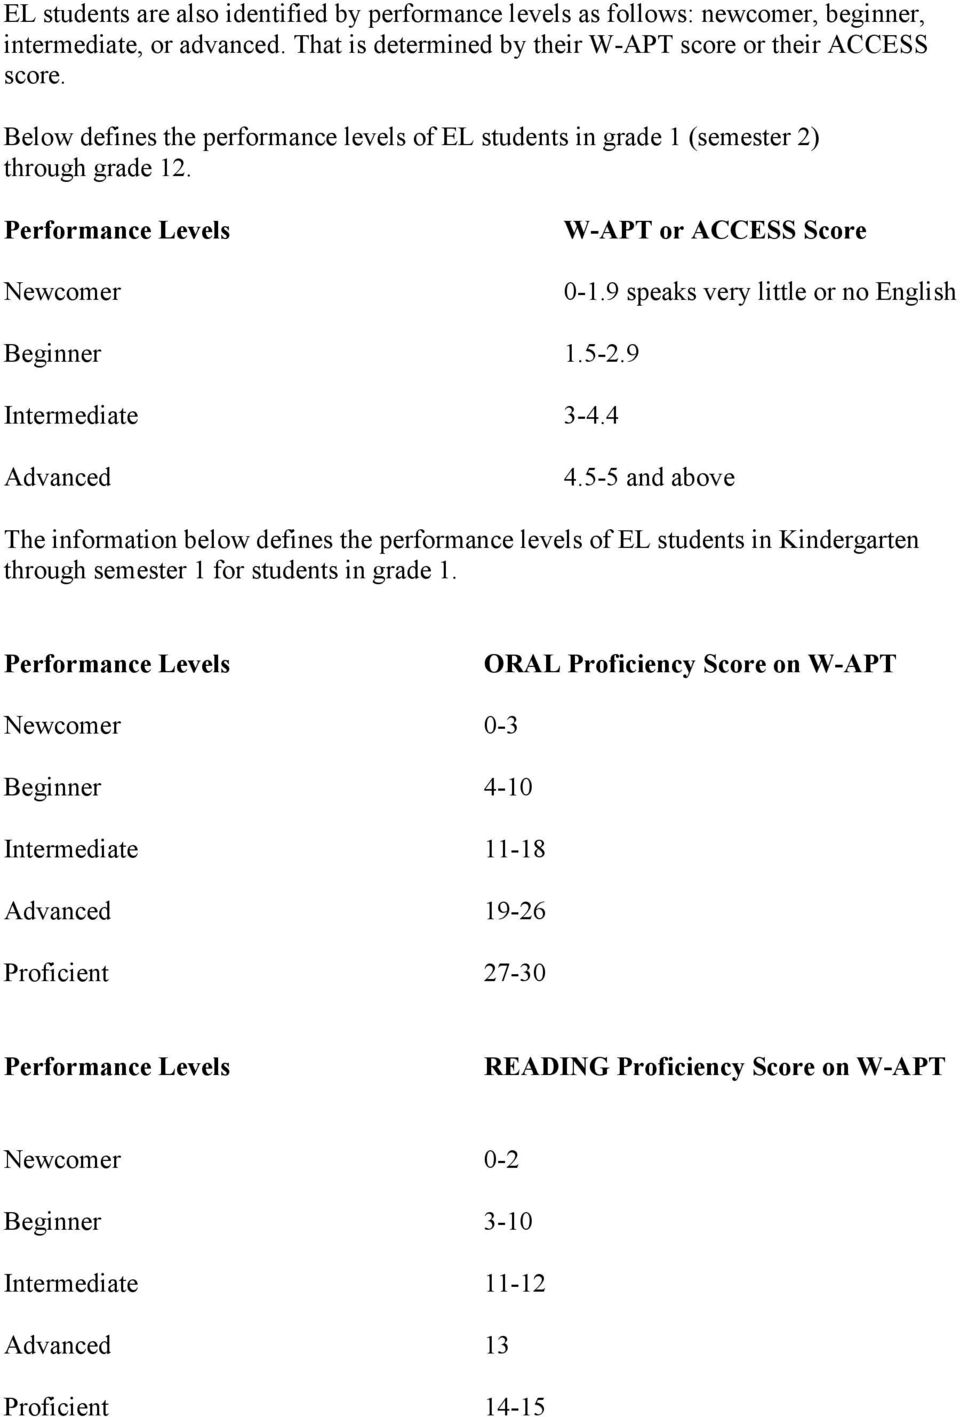 9 Intermediate 3-4.4 Advanced 4.5-5 and above The information below defines the performance levels of EL students in Kindergarten through semester 1 for students in grade 1.